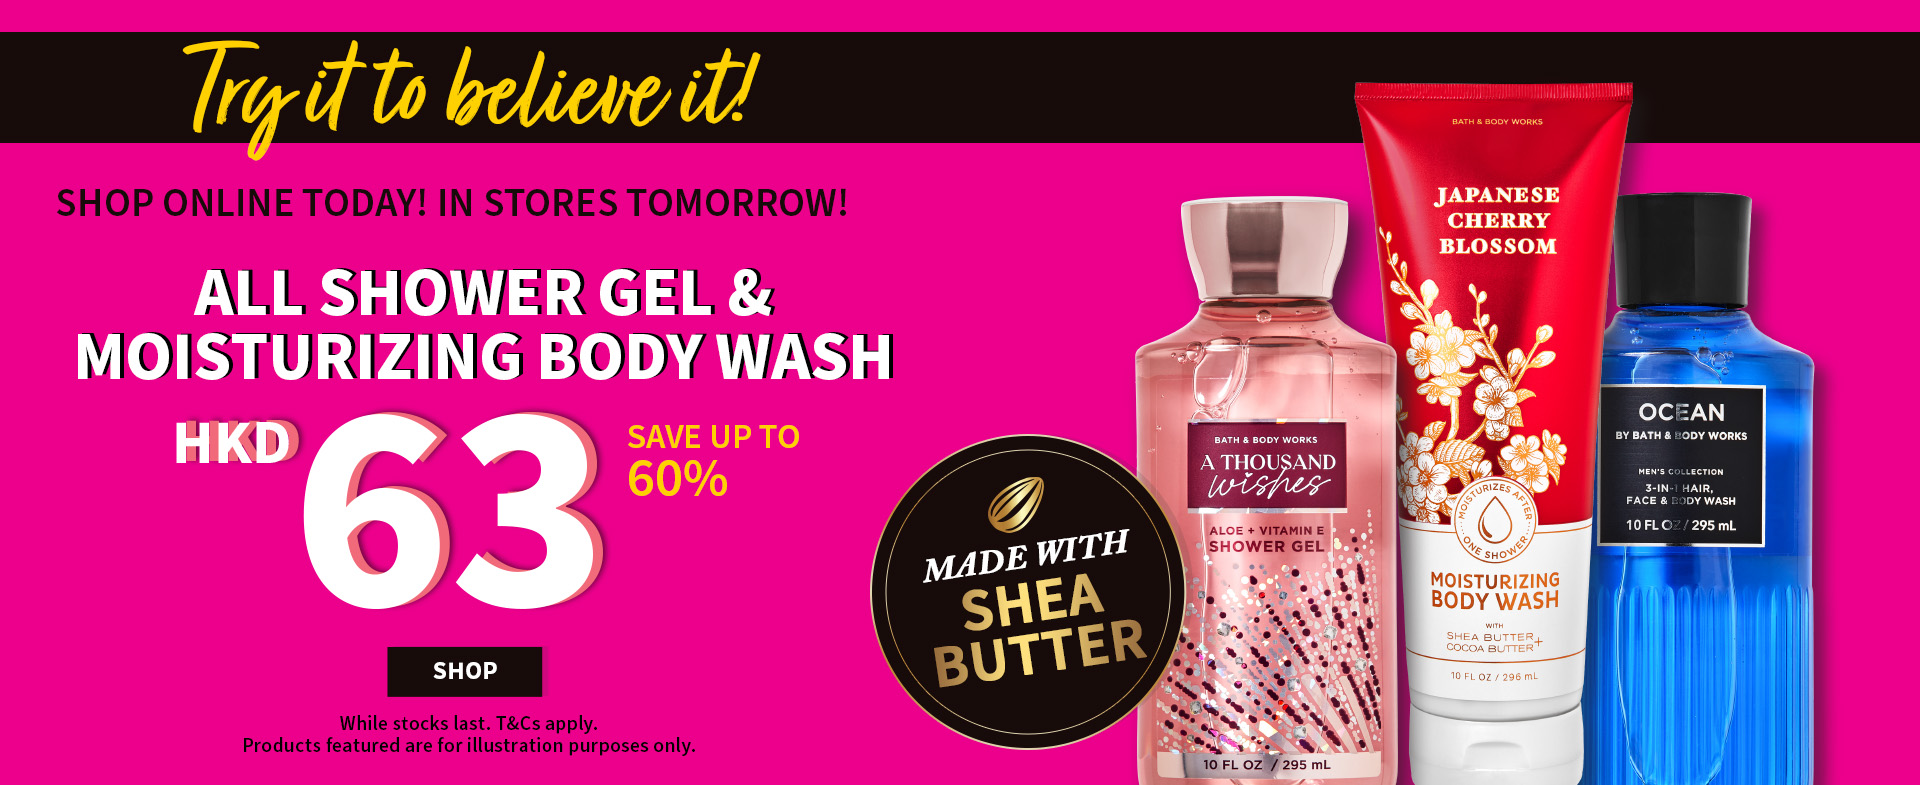 SHOP ONLINE TODAY! IN STORES TOMORROW! ALL SHOWER GEL & MOISTURIZING BODY WASH $$